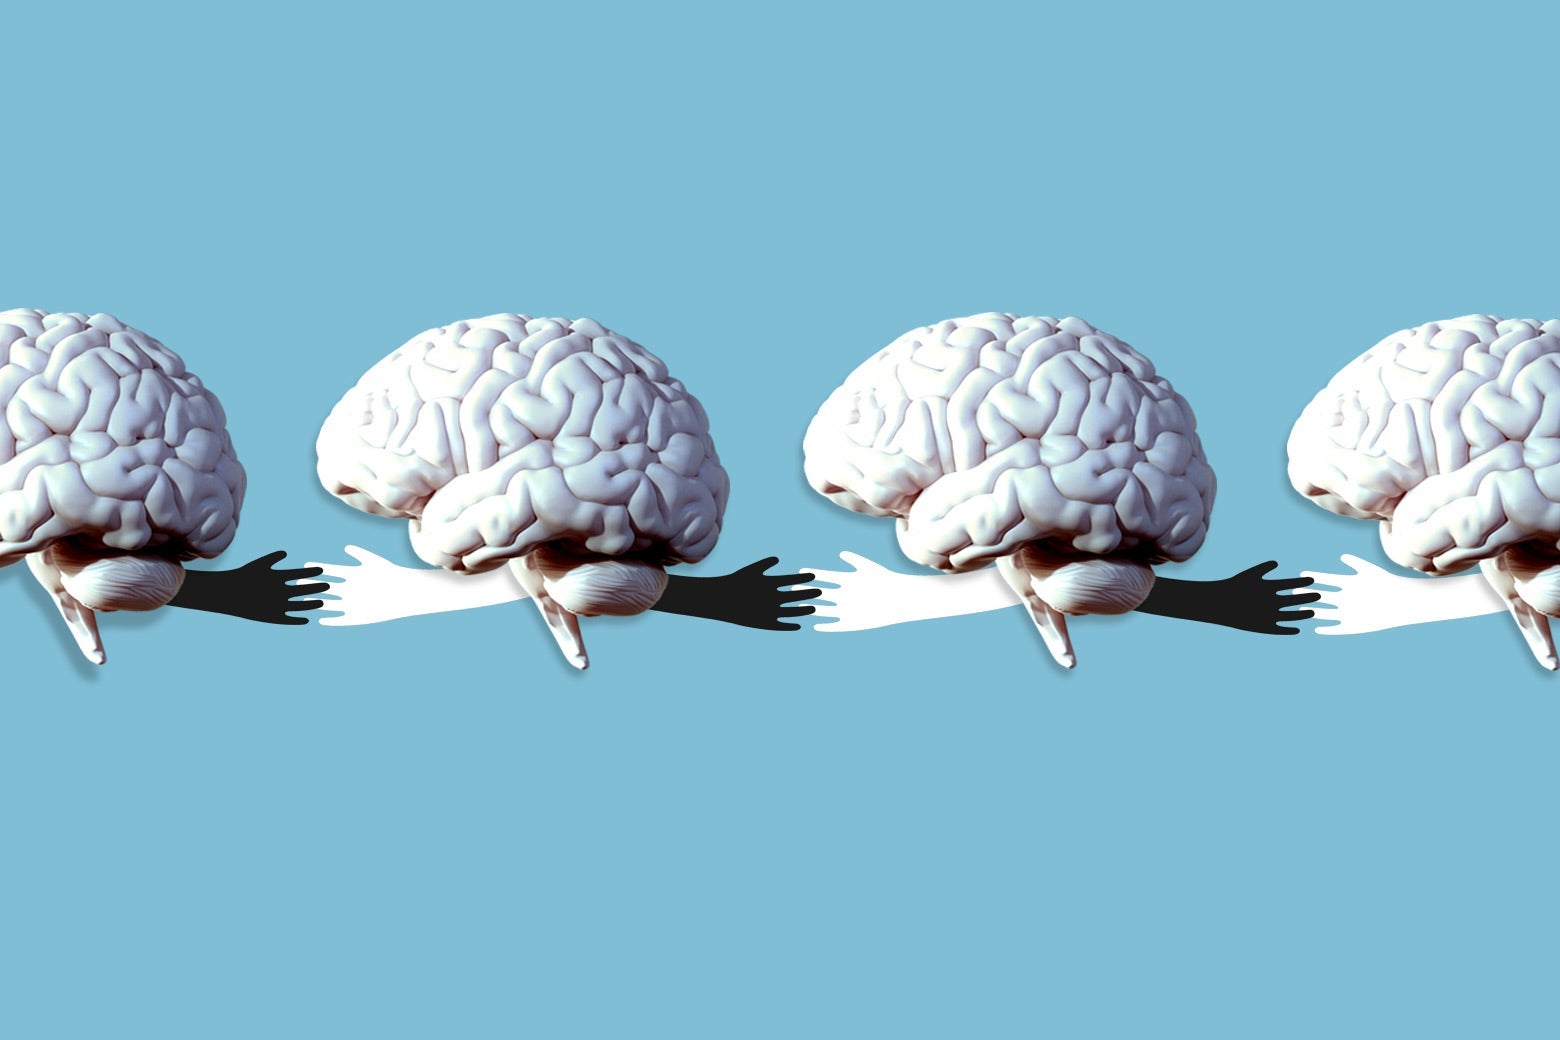 A row of brains holding hands